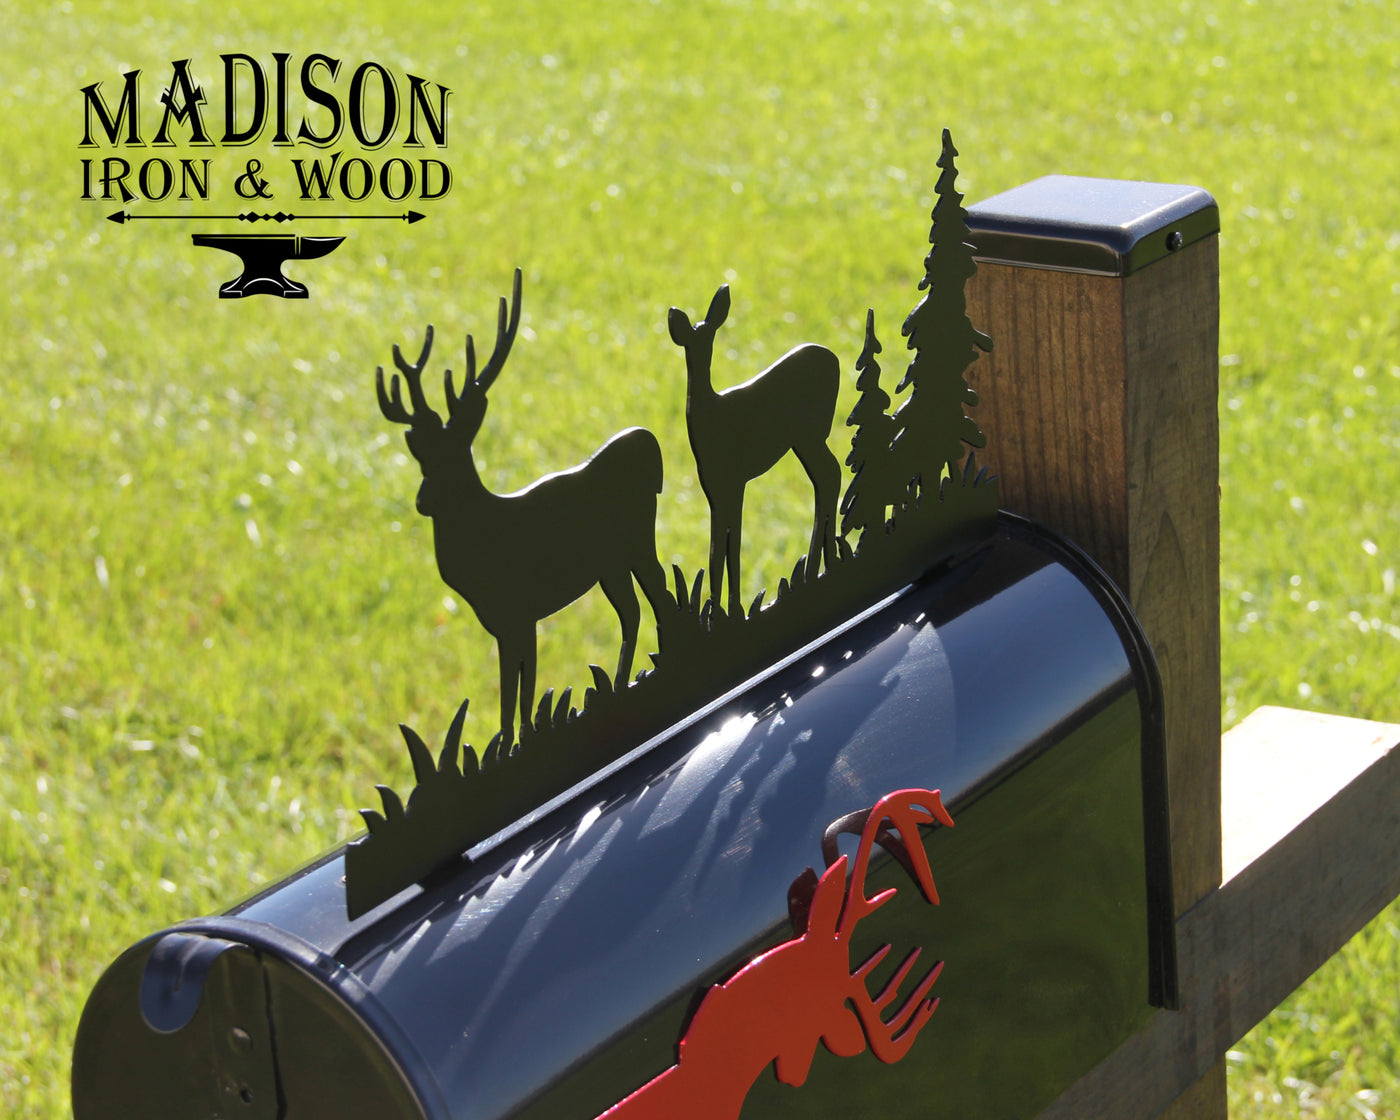 Deer and Doe Mailbox Topper - Madison Iron and Wood - Mailbox Post Decor - metal outdoor decor - Steel deocrations - american made products - veteran owned business products - fencing decorations - fencing supplies - custom wall decorations - personalized wall signs - steel - decorative post caps - steel post caps - metal post caps - brackets - structural brackets - home improvement - easter - easter decorations - easter gift - easter yard decor